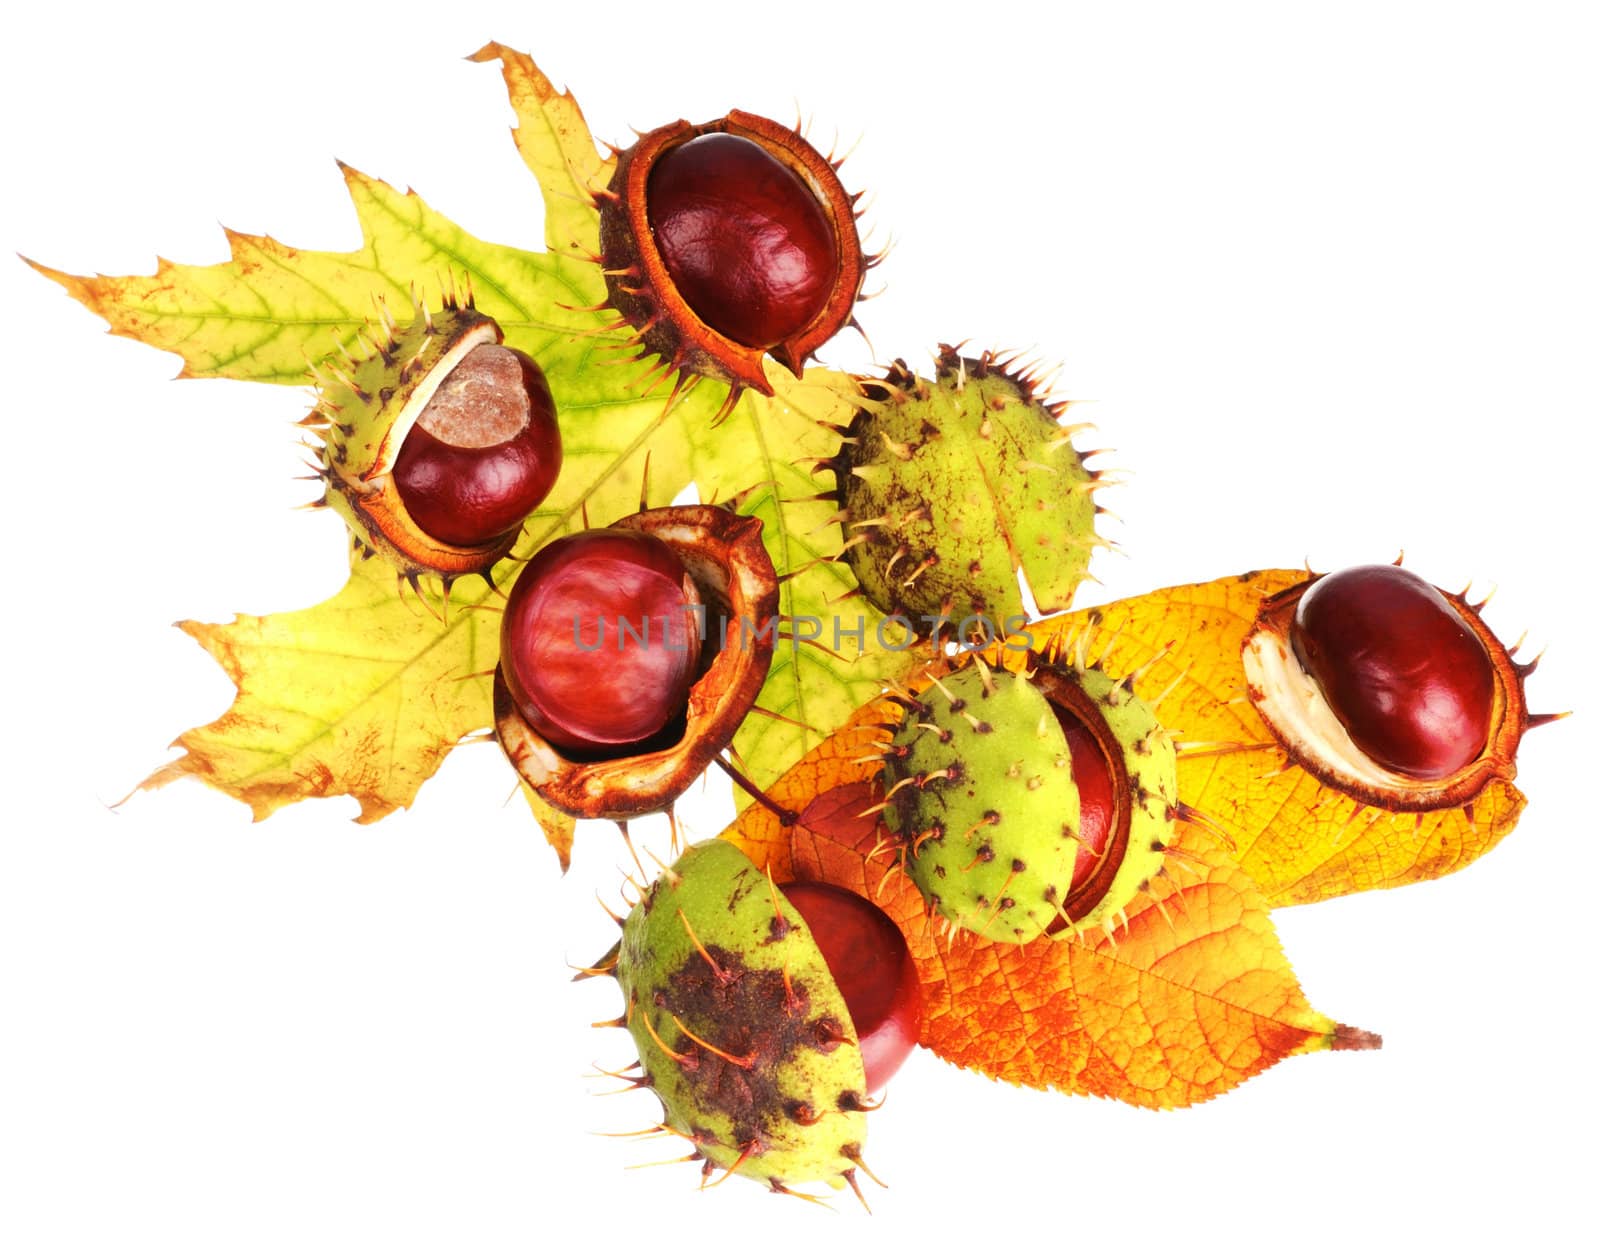 Ripe chestnuts in peel on automnal poplar and maple leaves